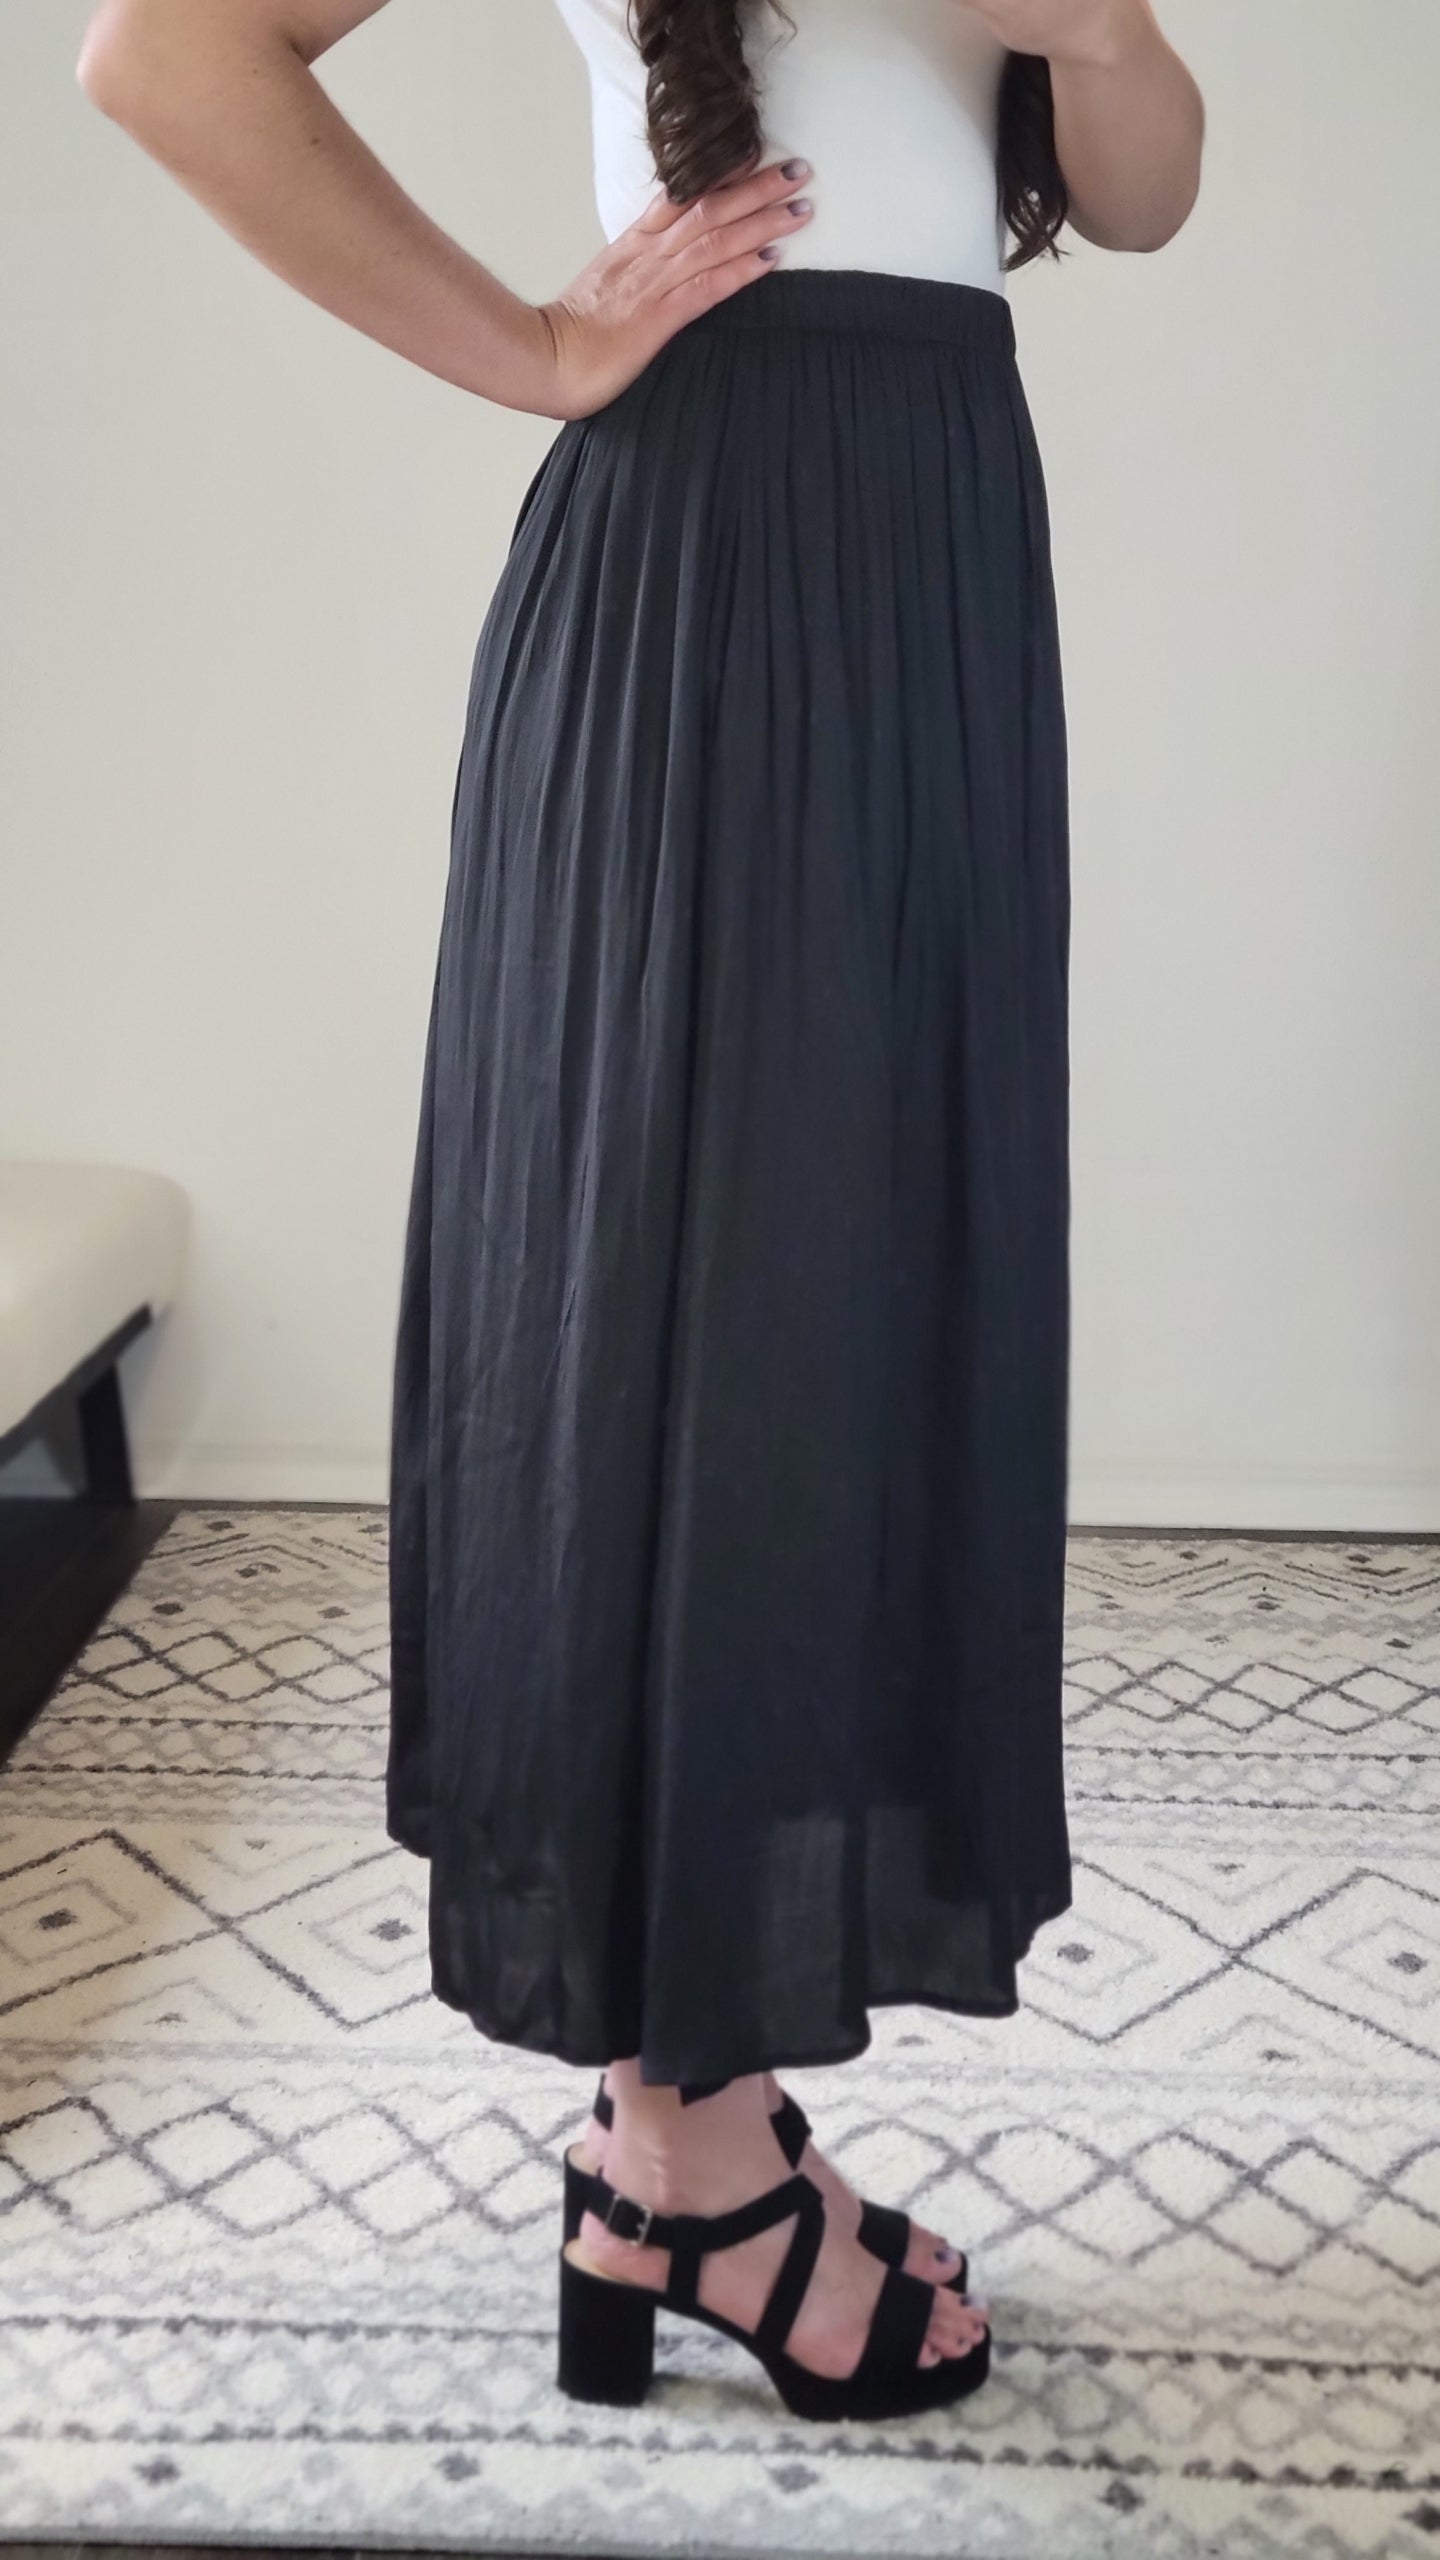 Black A-Line Skirt with Pockets "Carrie"